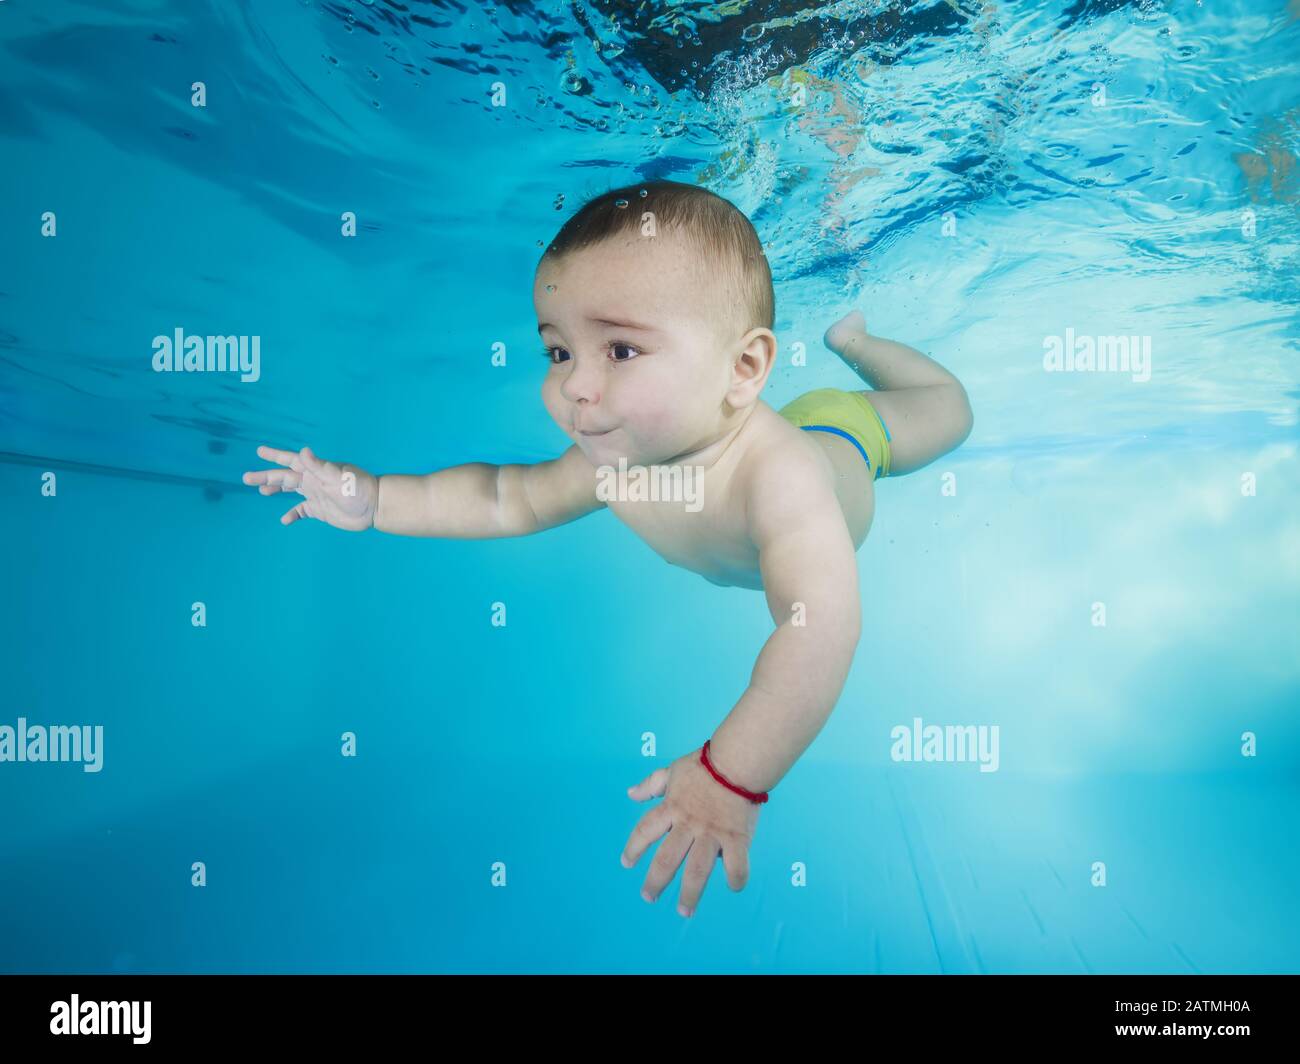 boy learns to dive underwater in a swimming pool Stock Photo